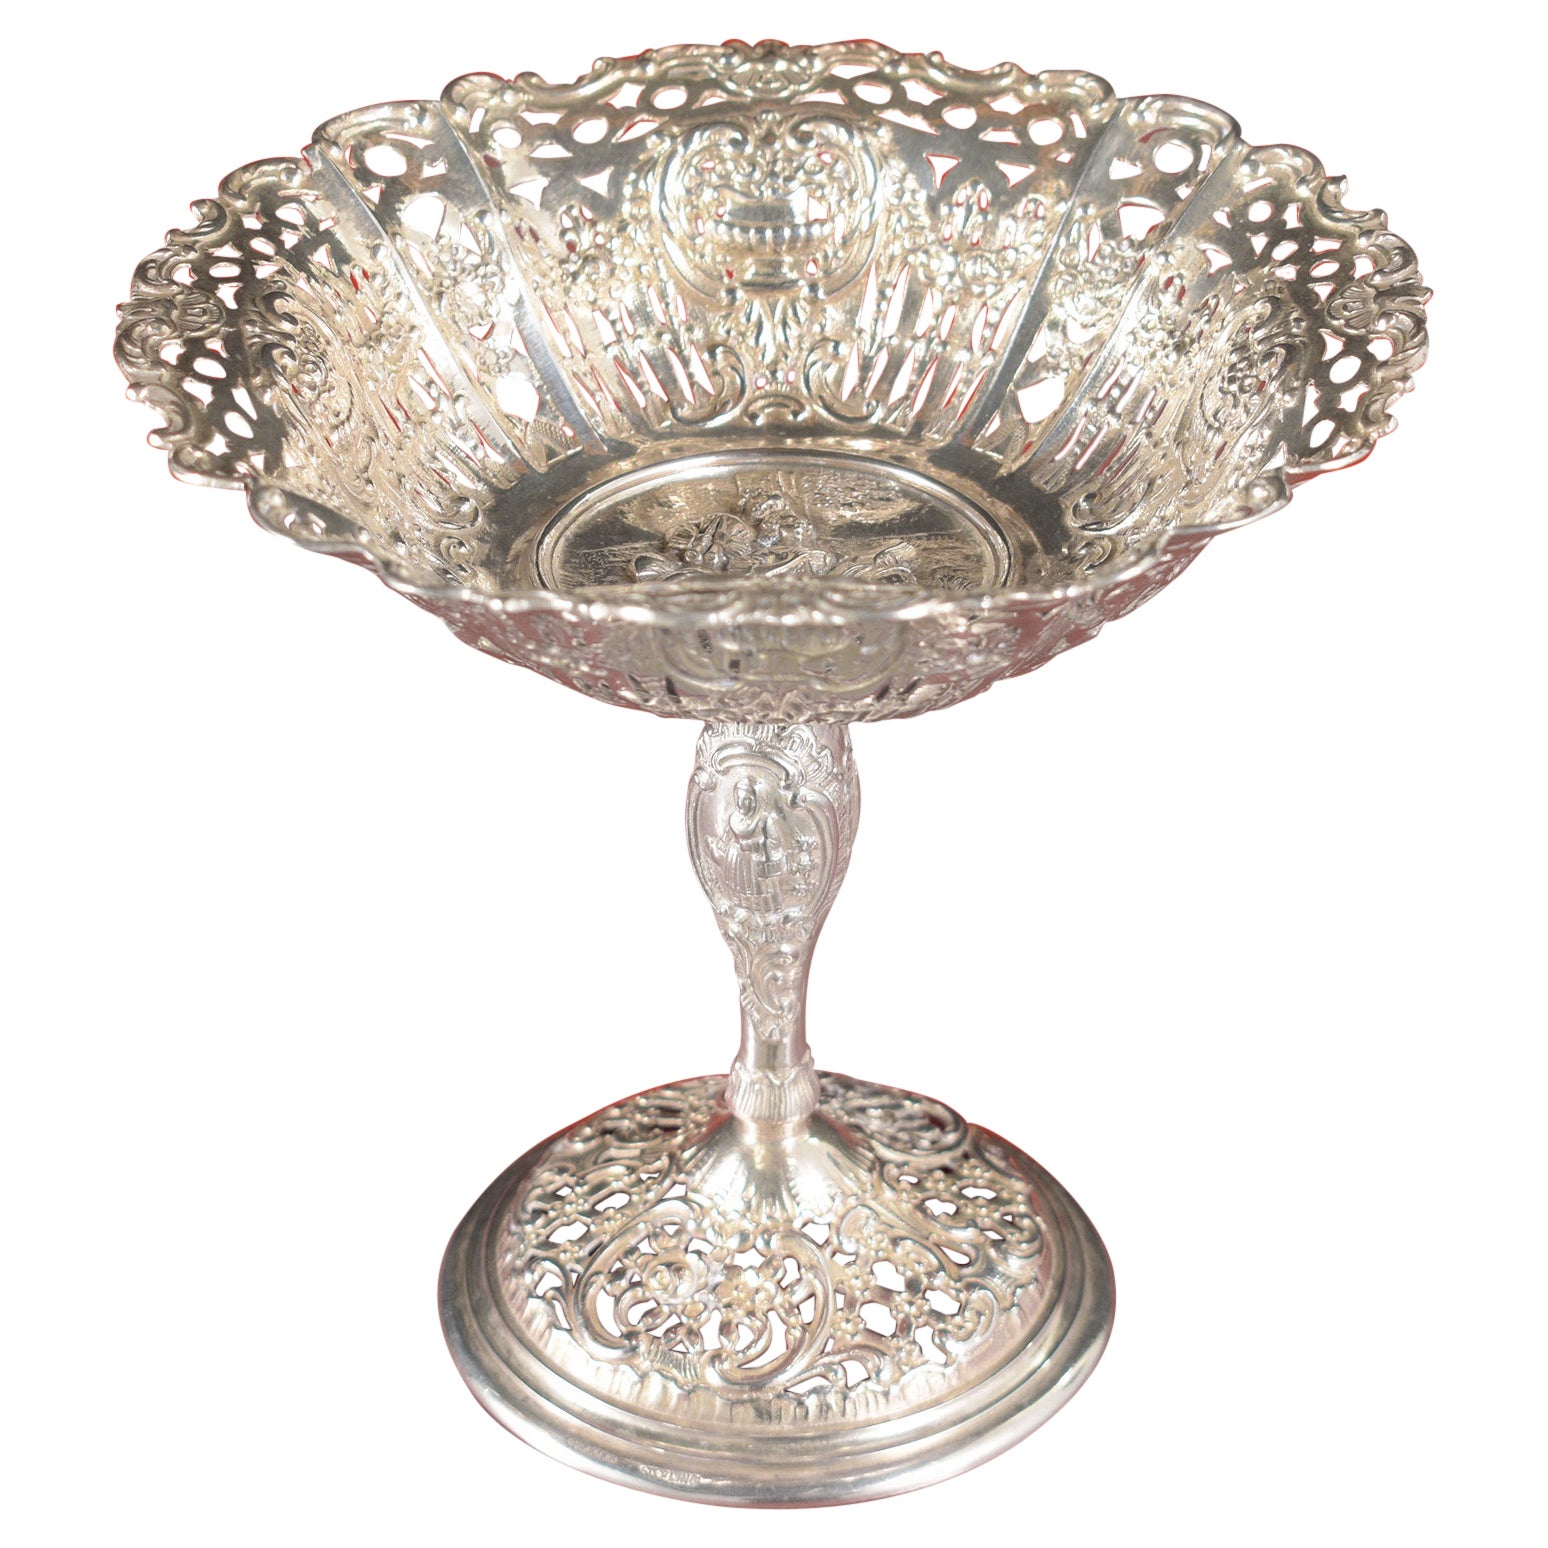 1970s Sterling Silver Compote: Delicate Intricate Design & Timeless Elegance